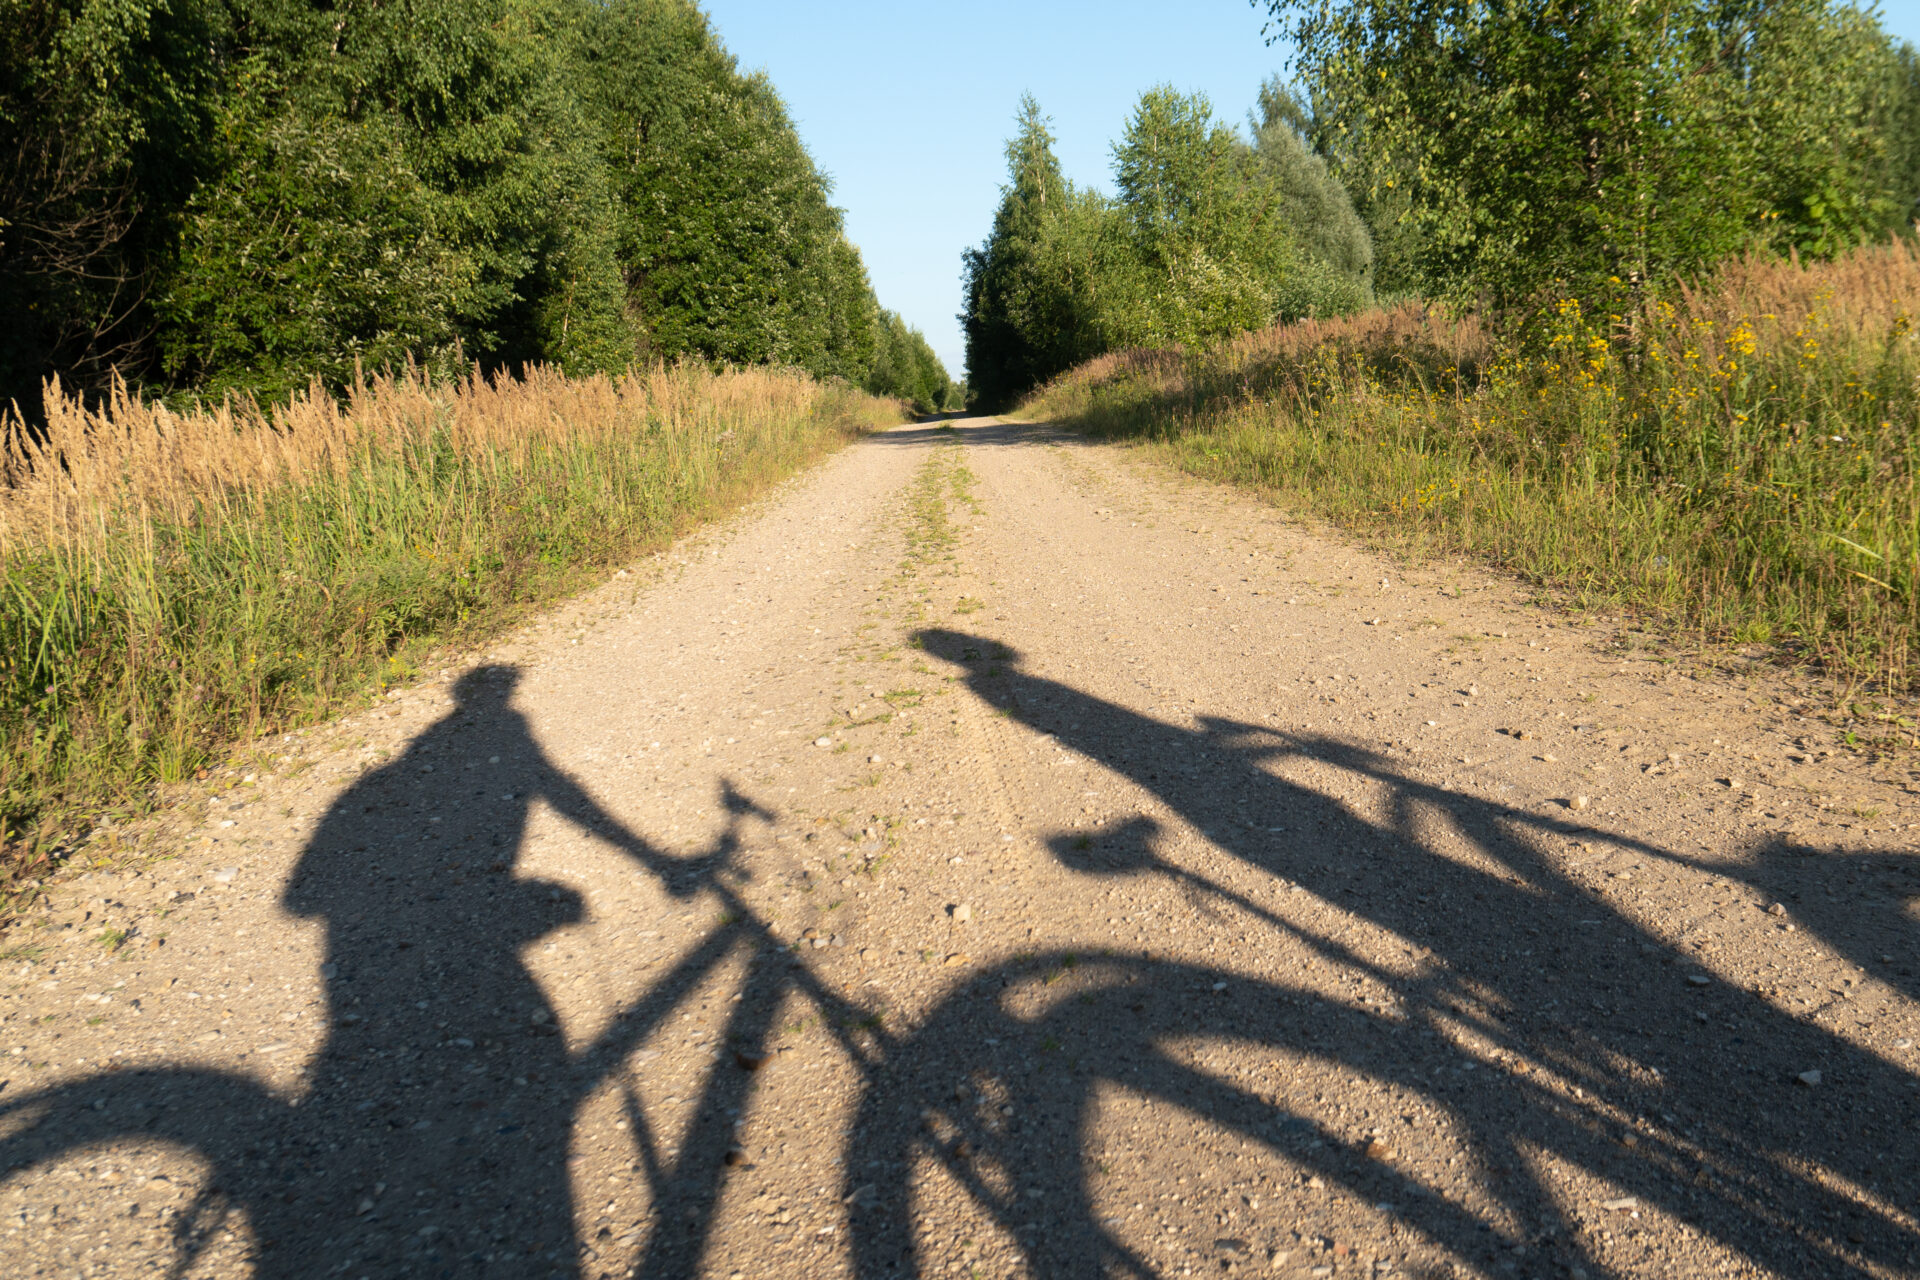 Shadows from hikers riding on the bicycles on the forest road in summer sunny evening. Concept of a summer bicycle journey